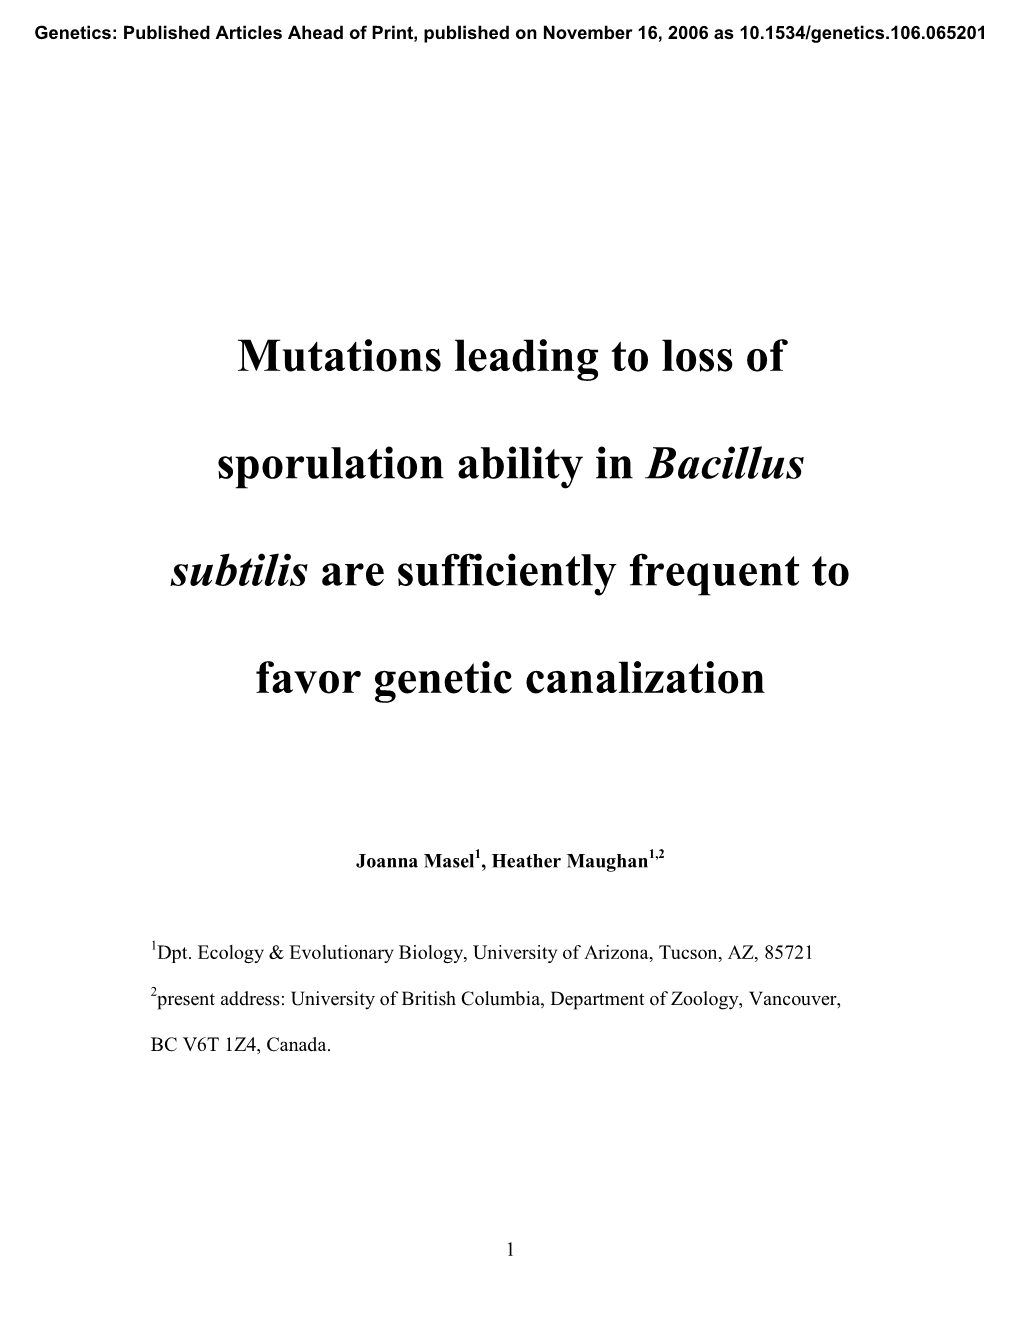 Mutations Leading to Loss of Sporulation Ability In